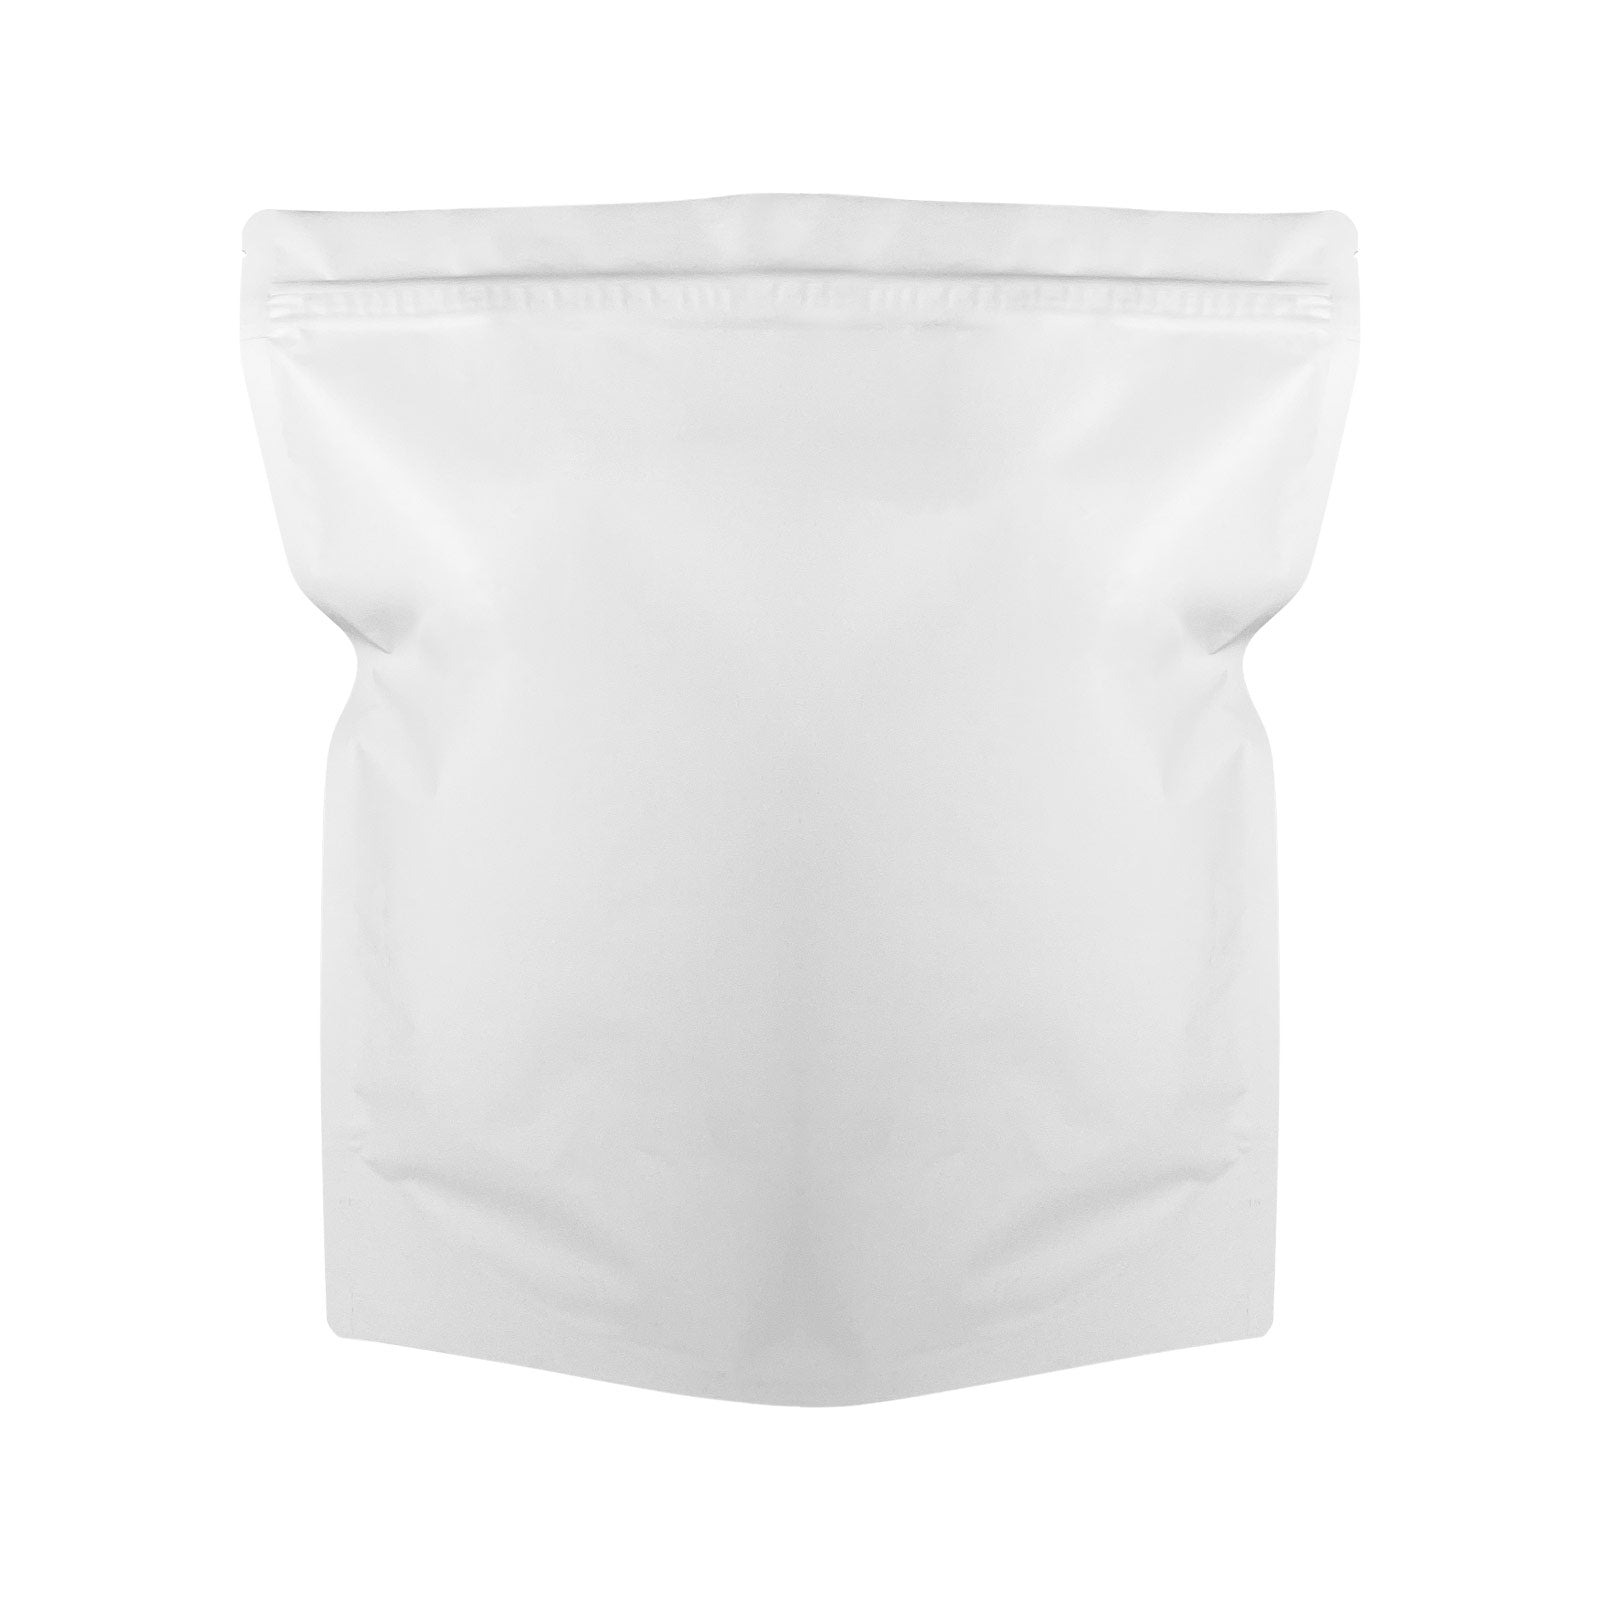 14.6"x16.4"+4" Extra Large Child Resistant 1-3 lbs Exit Bags All White - 200 Count